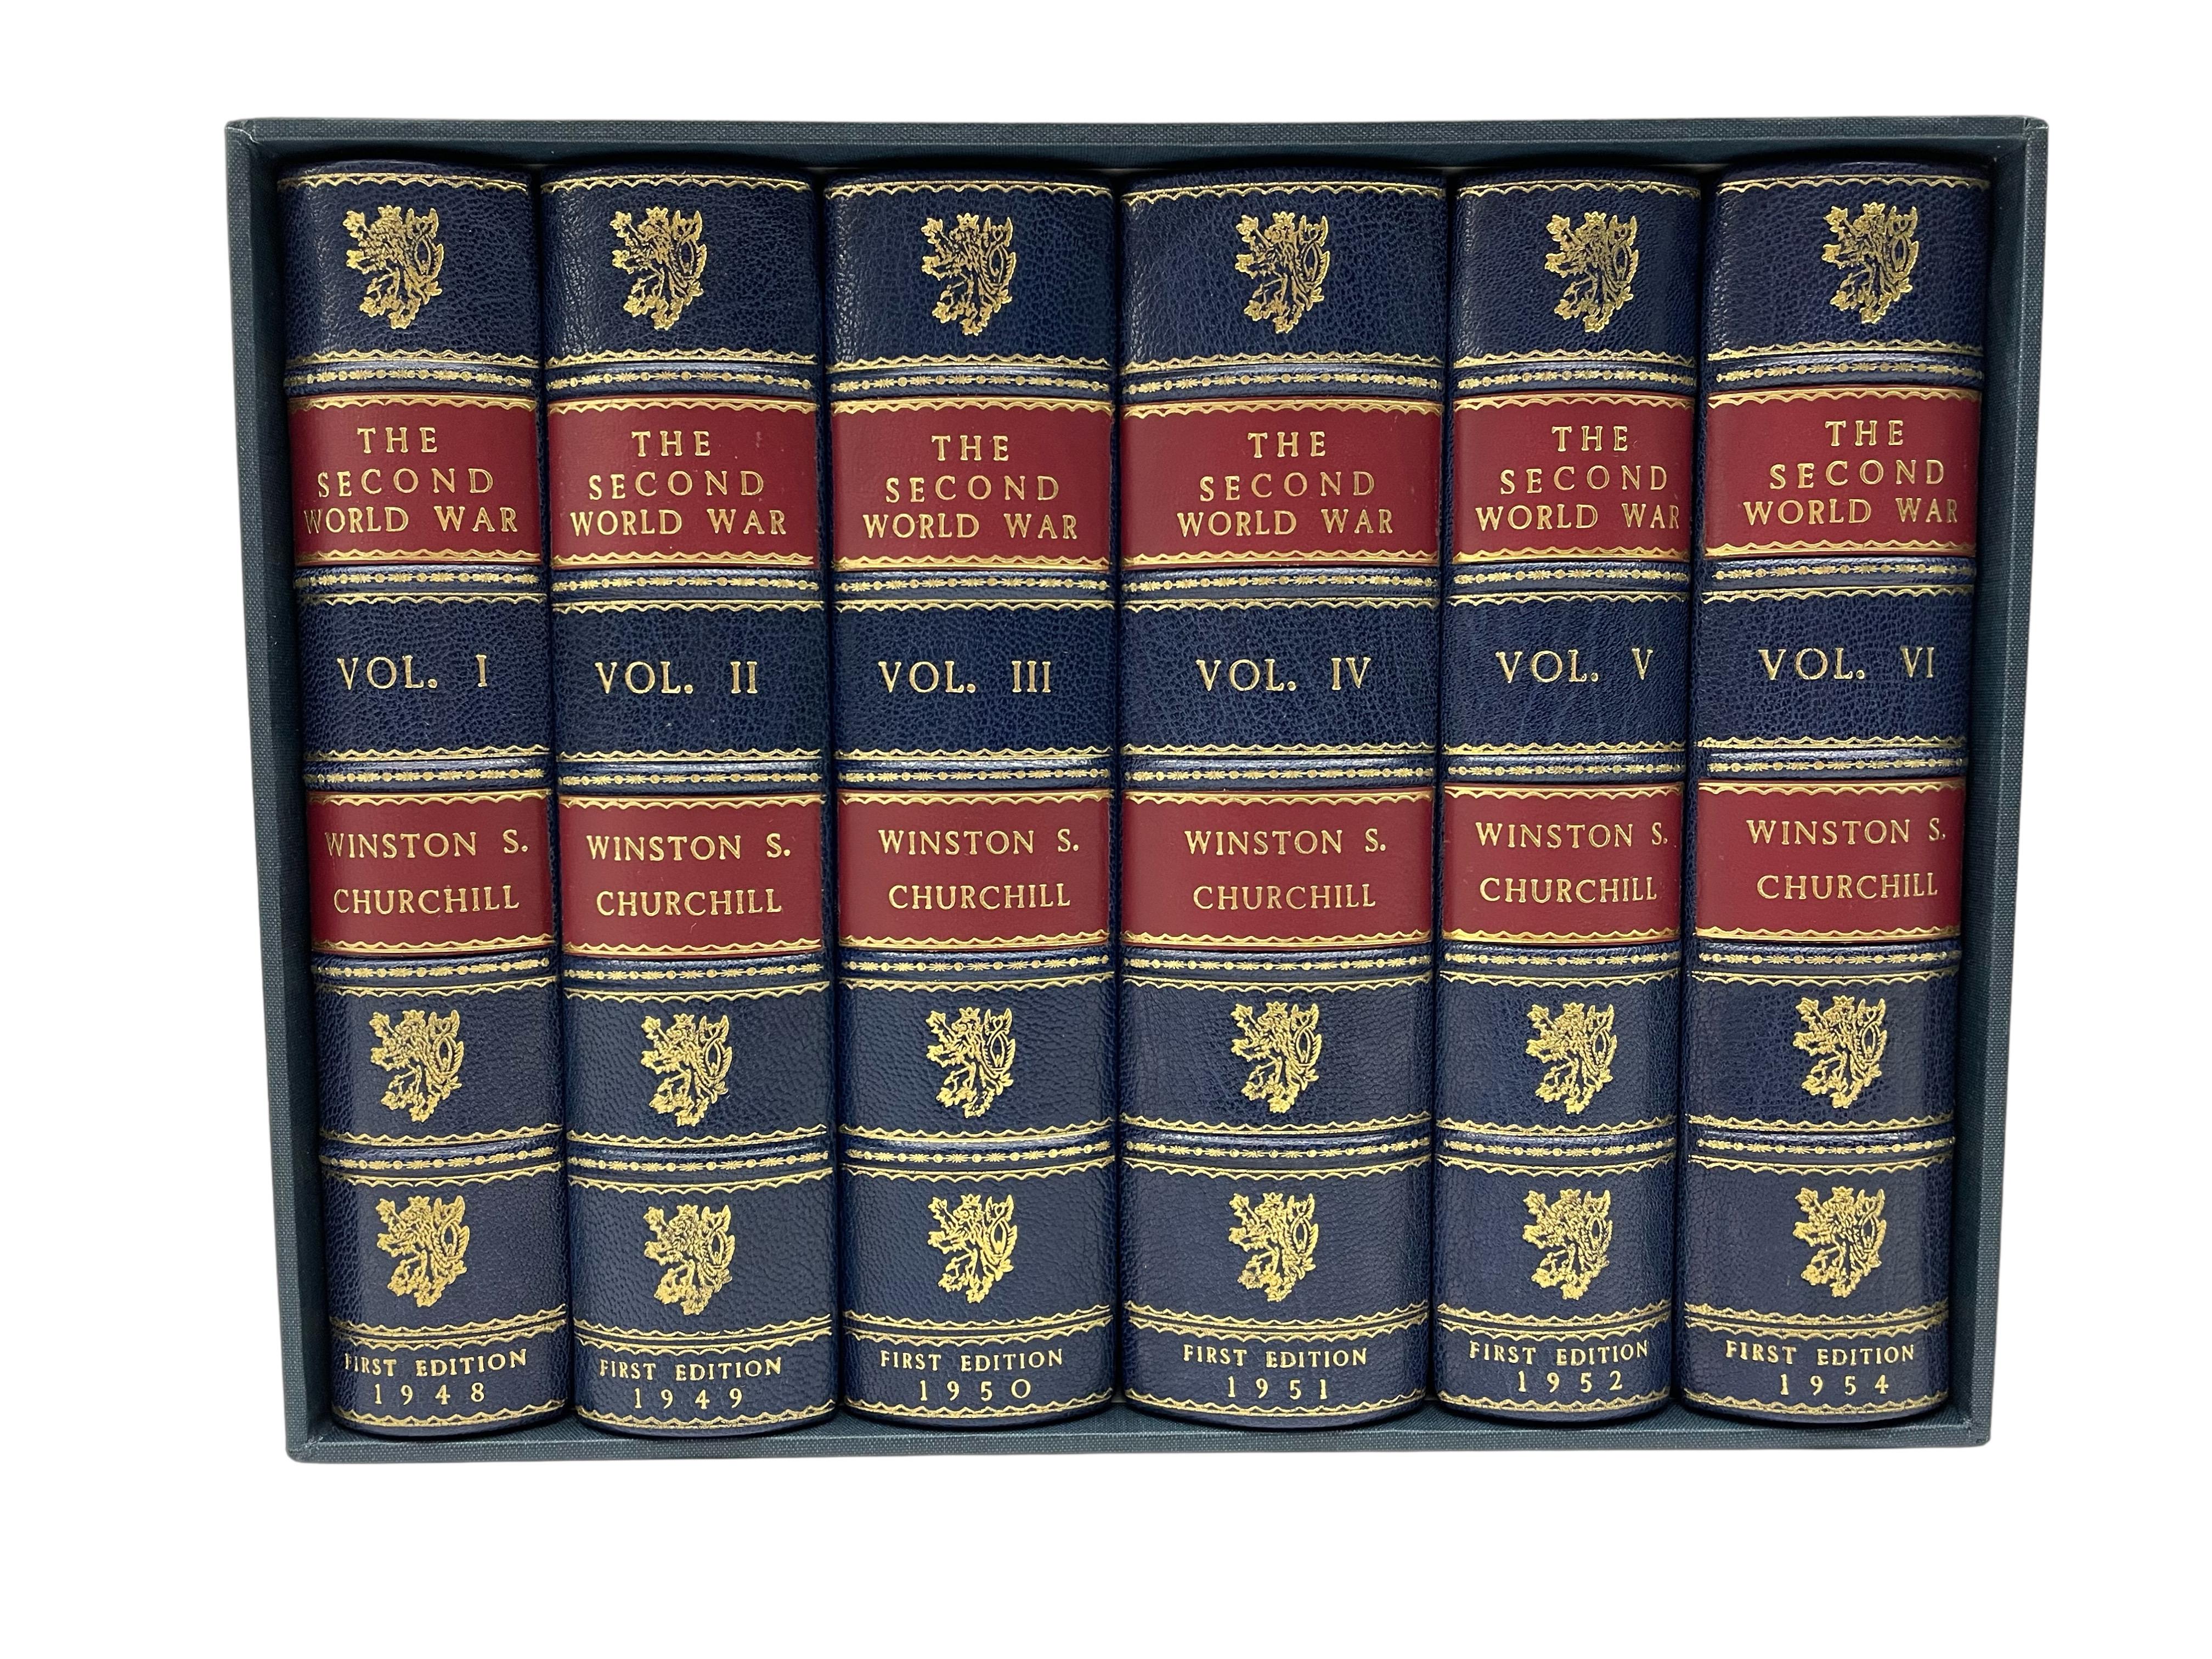 Churchill, Winston, The Second World War. London, 1948-1954: Cassell & Co. Ltd. First editions, 6 vols. Rebound in ¼ leather and cloth boards, with gilt titles, tooling, and raised bands to the spine. Presented with a new archival matching cloth